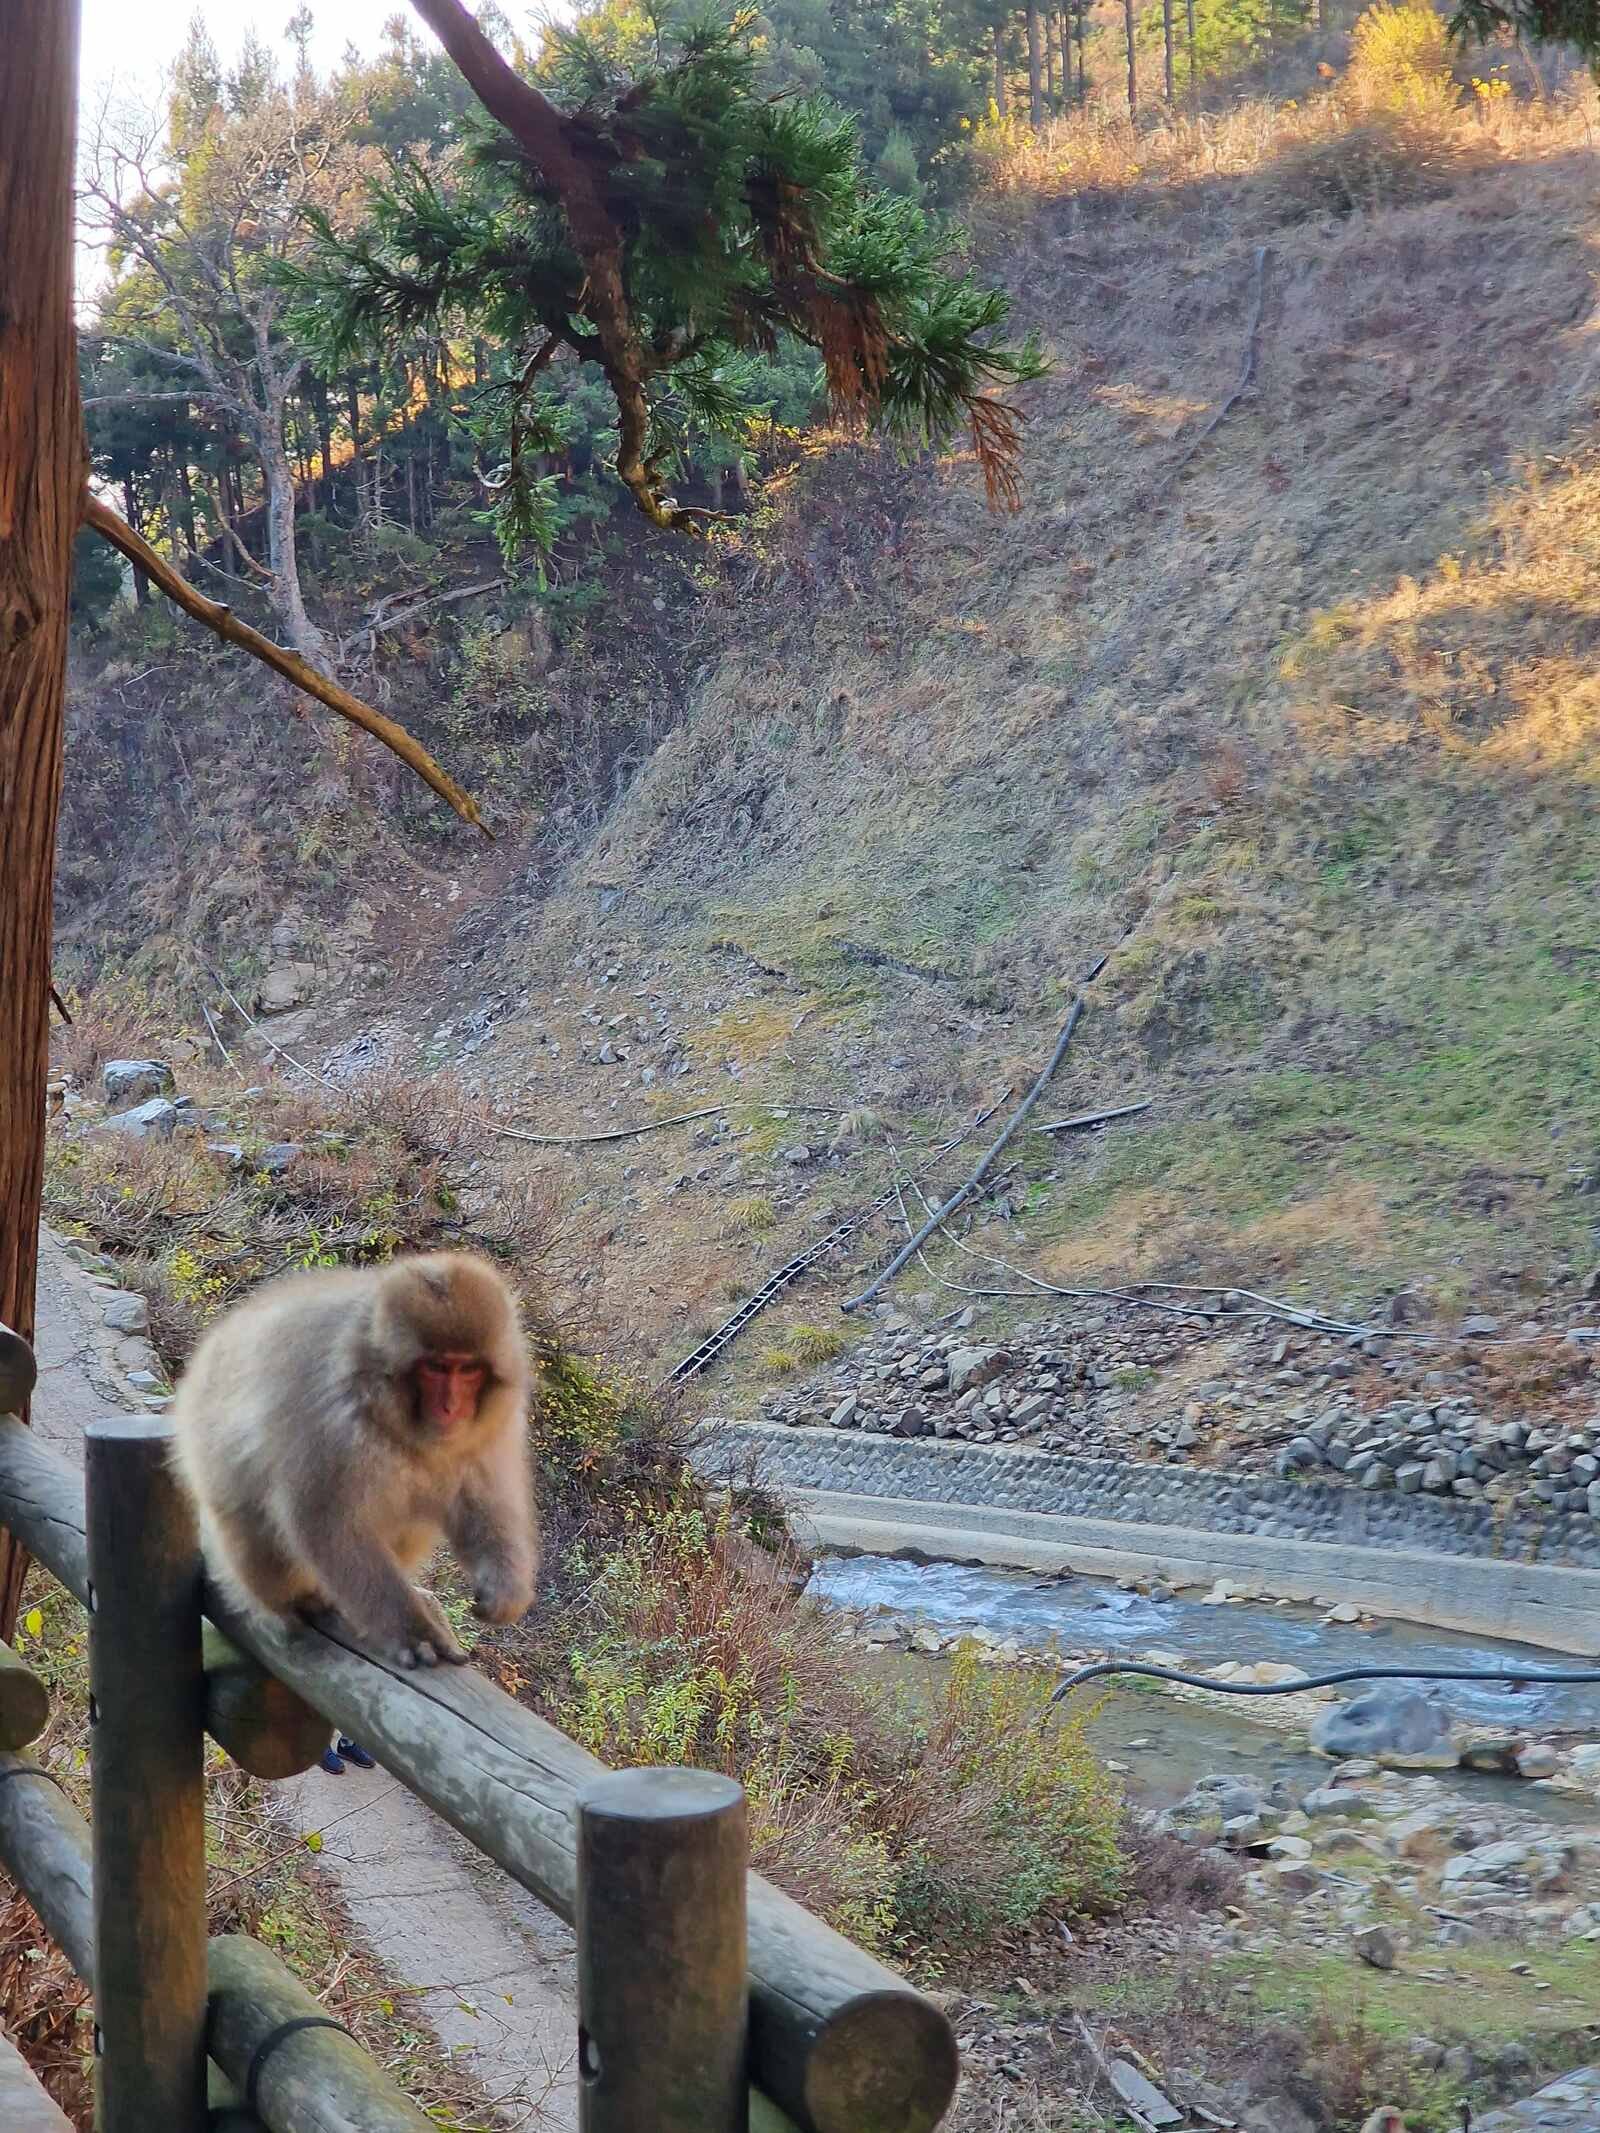 a fluffy Japanese snow monkey walking along a wooden fence next to a river